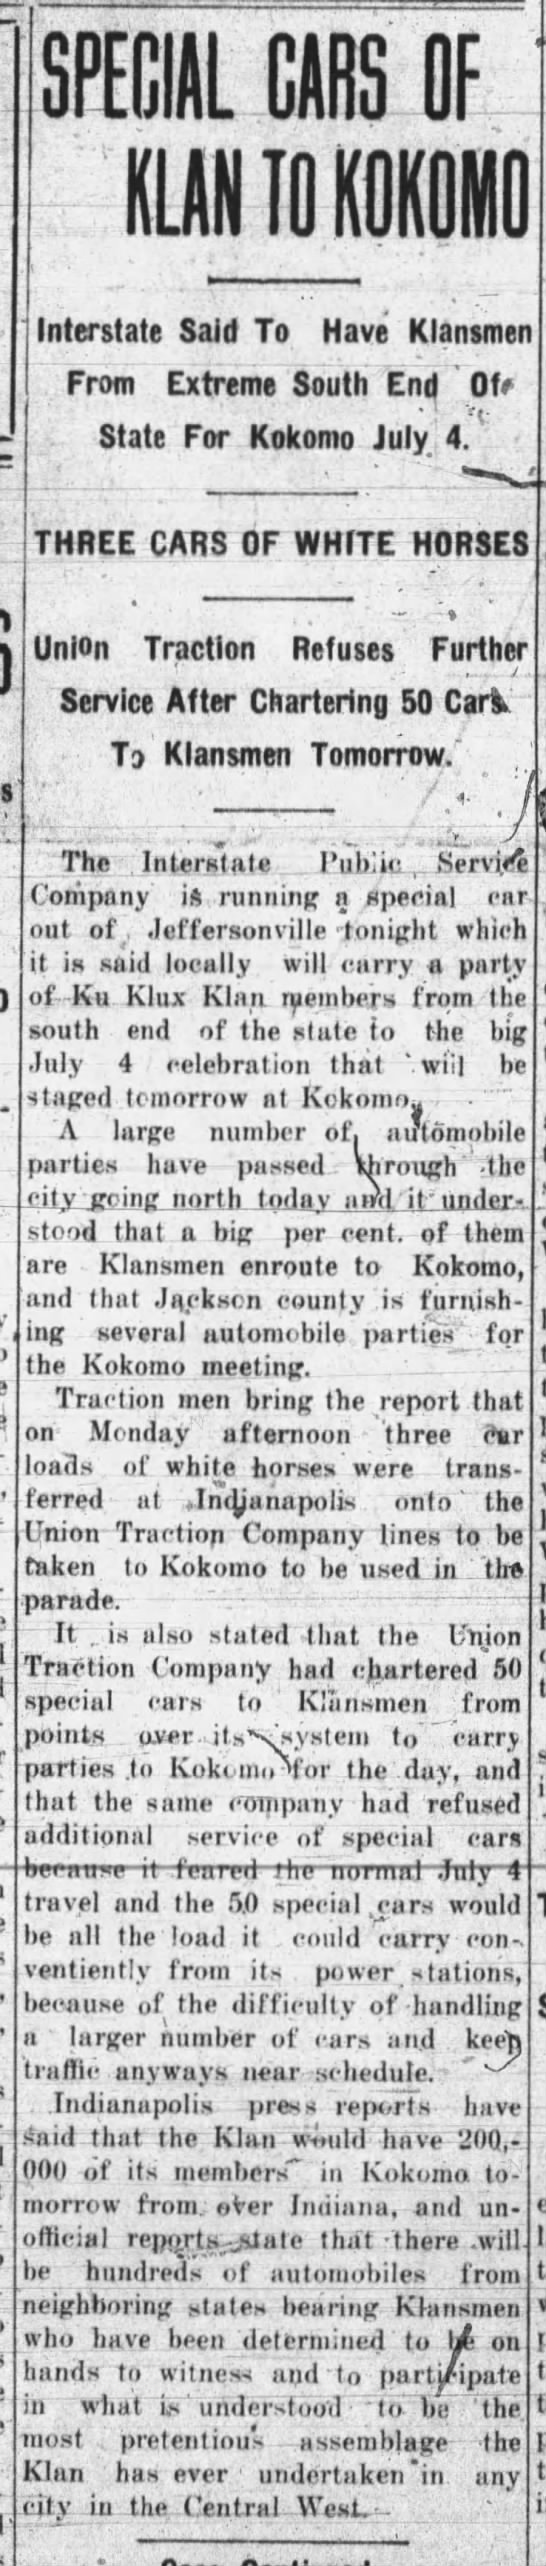 Union Traction to transport 50 carloads of Klansmen to Kokomo, Indiana for July 4, 1923 - 